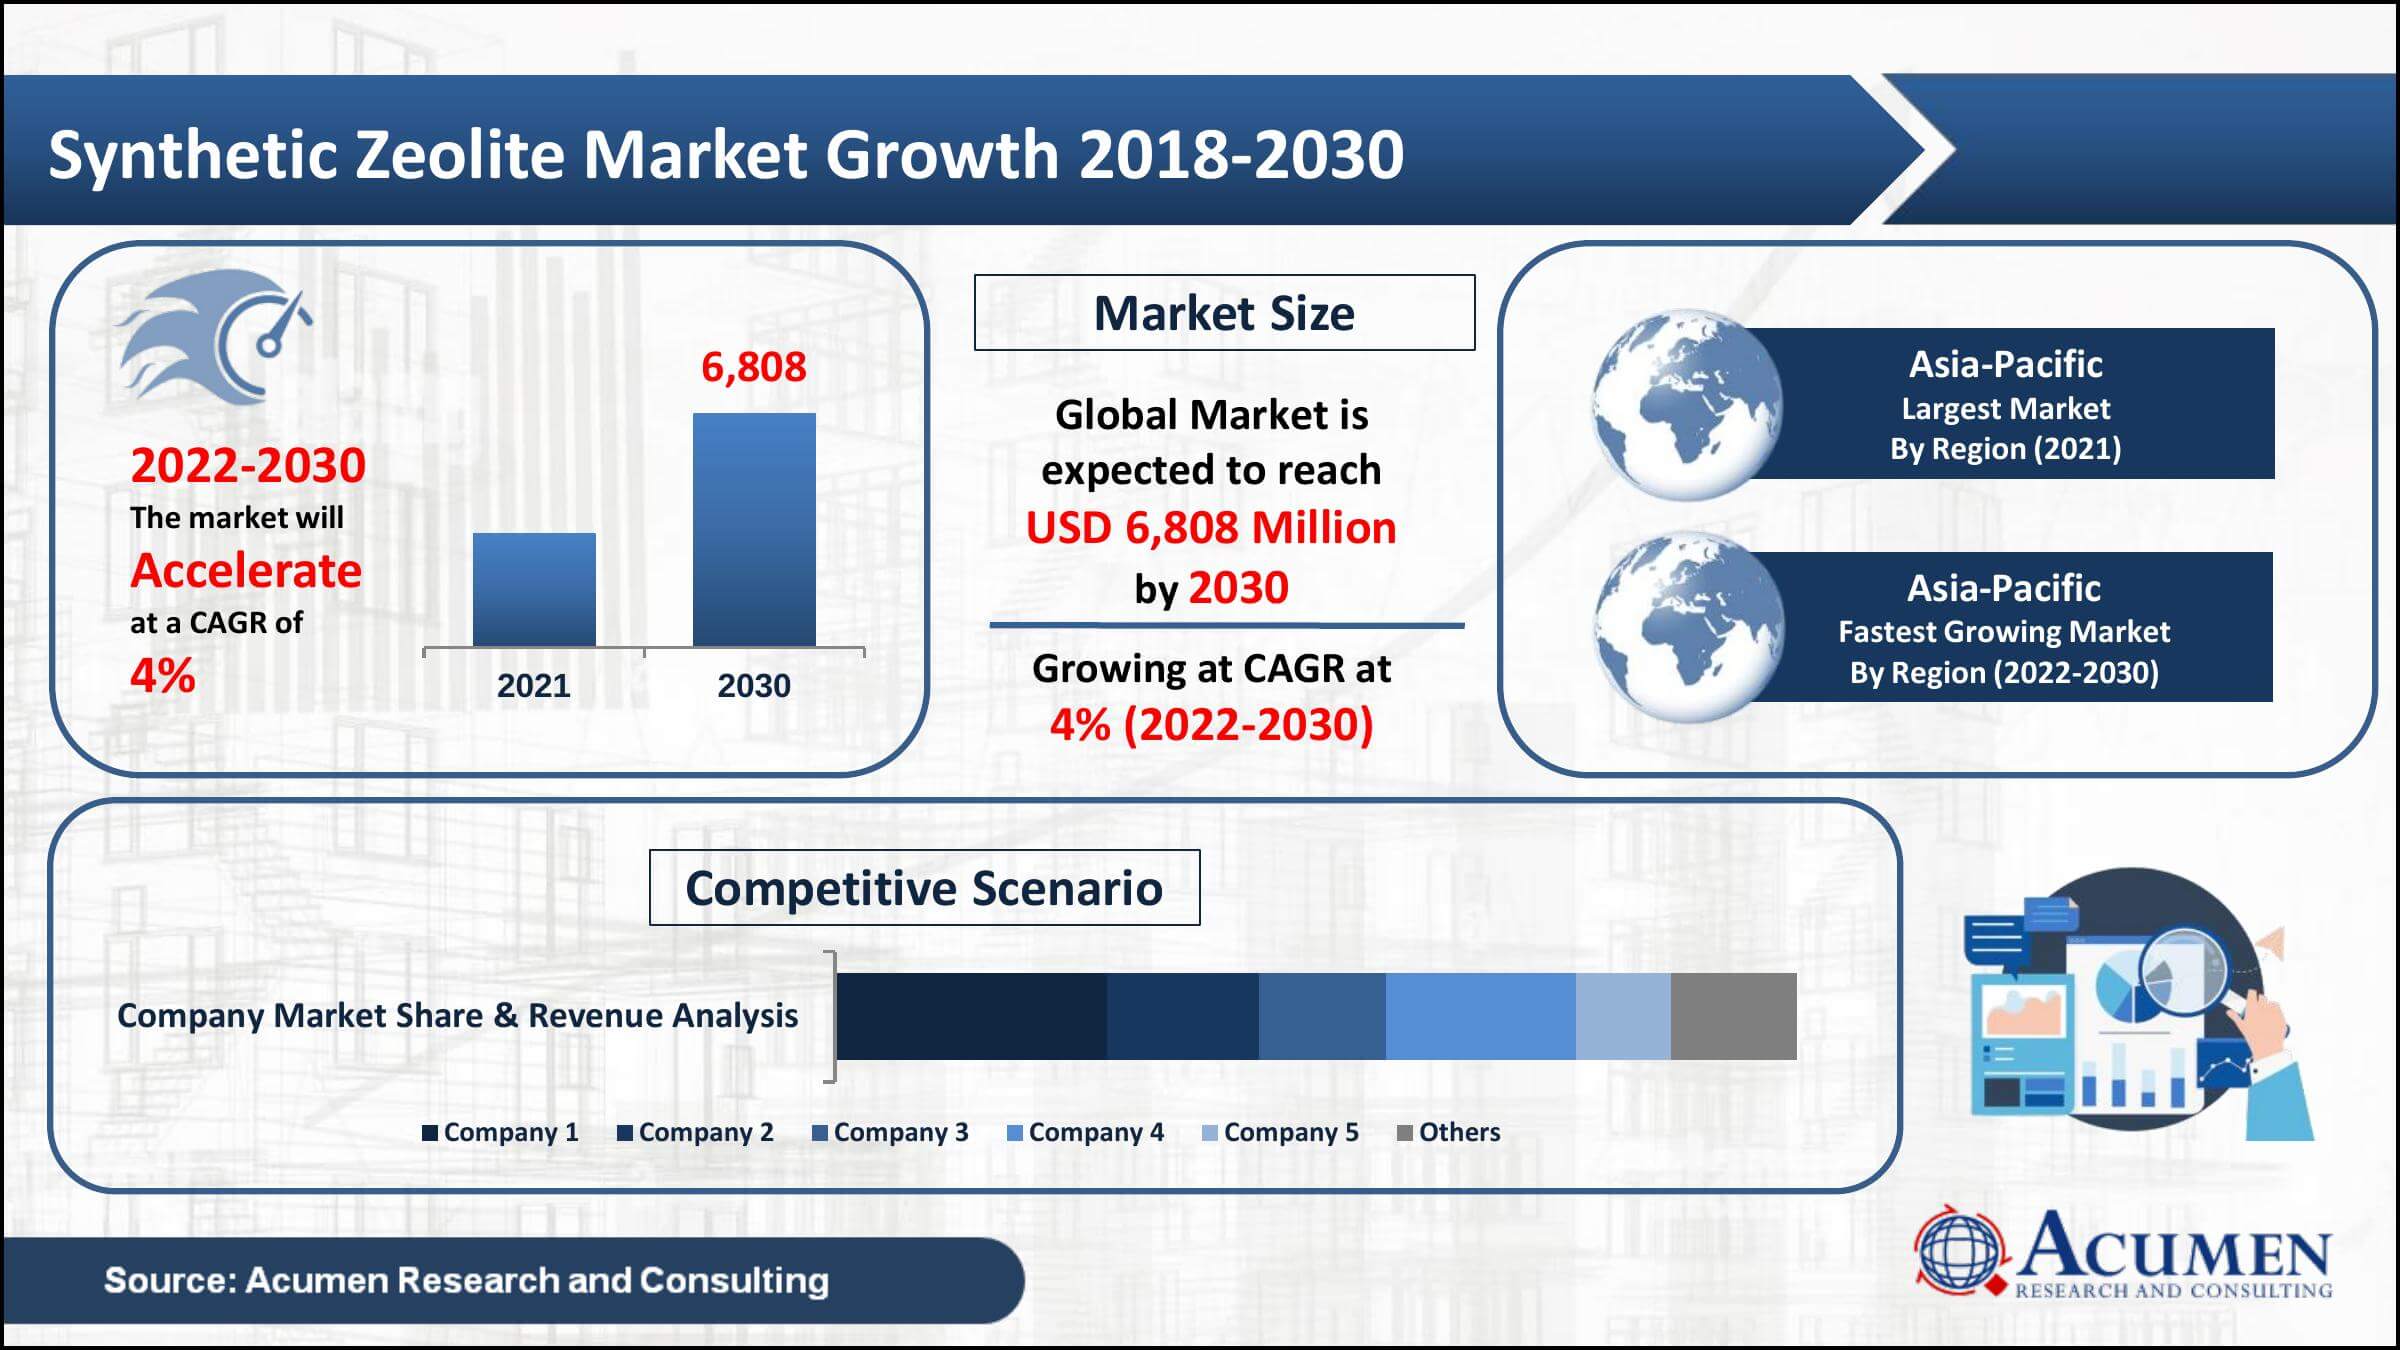 Global Synthetic Zeolite market value was worth USD 4,825 Million in 2021, with a 4% CAGR from 2022 to 2030